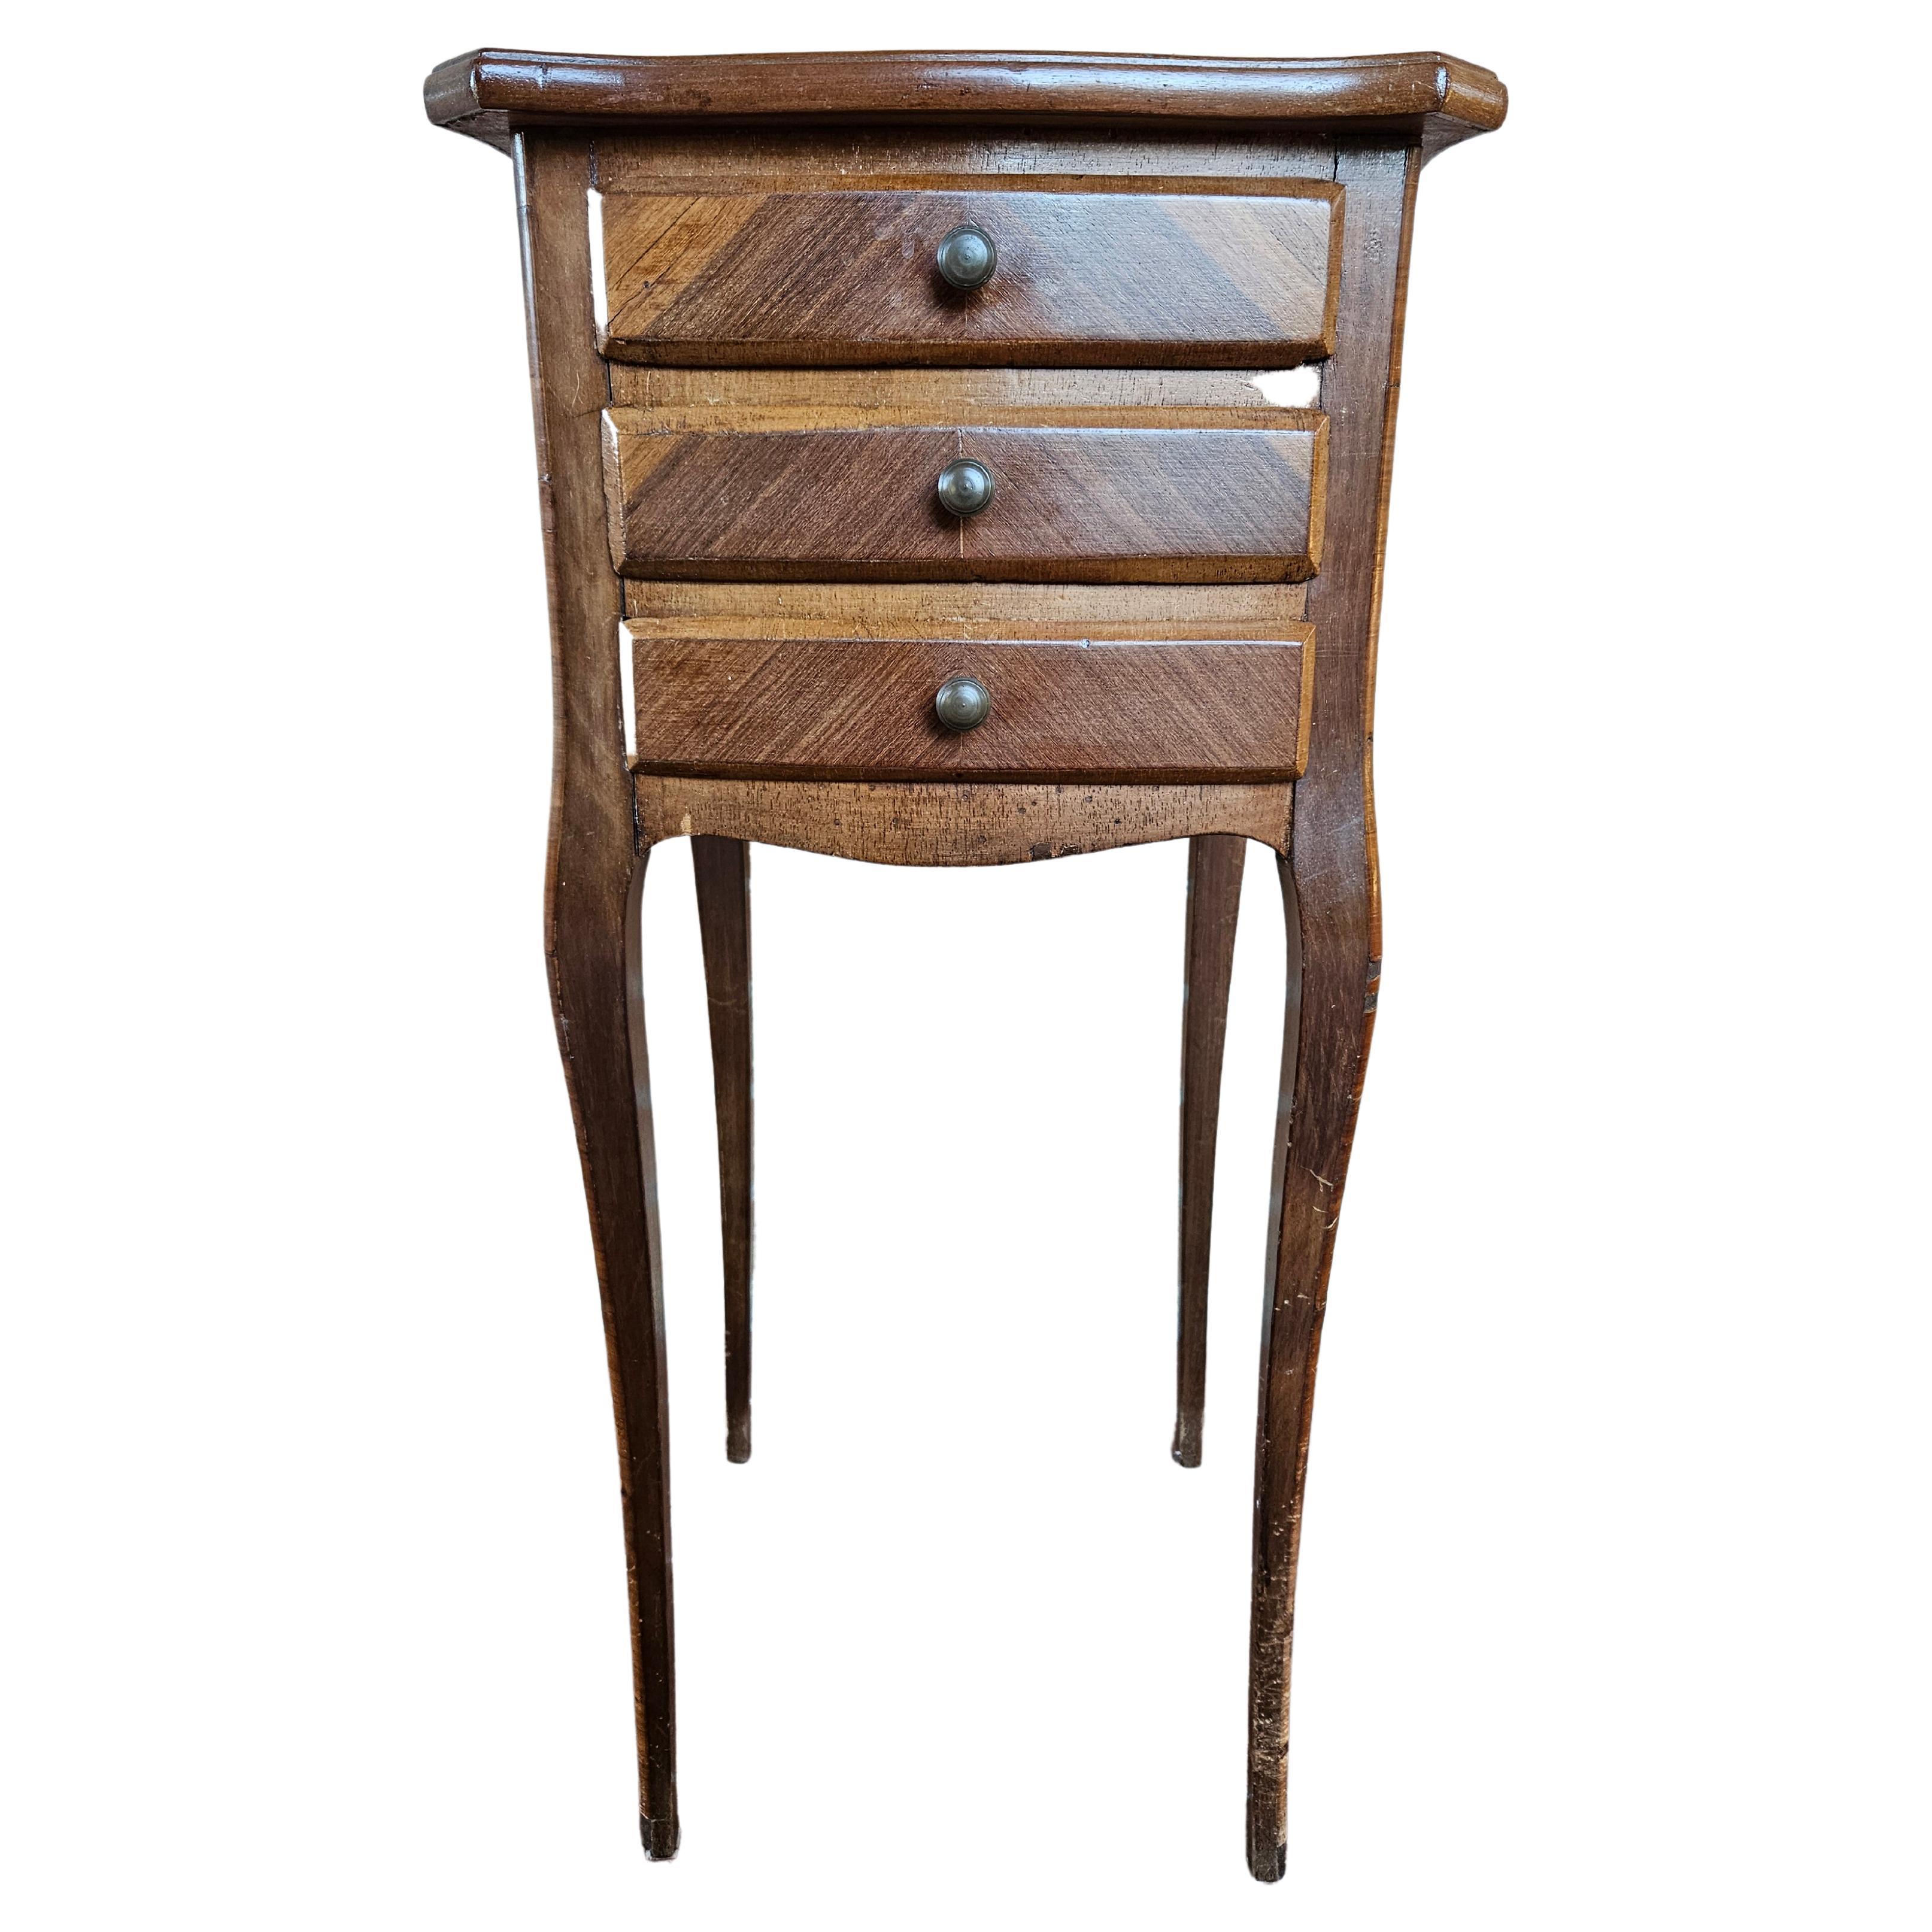 Neoclassical style entryway side table with three drawers 20th century For Sale